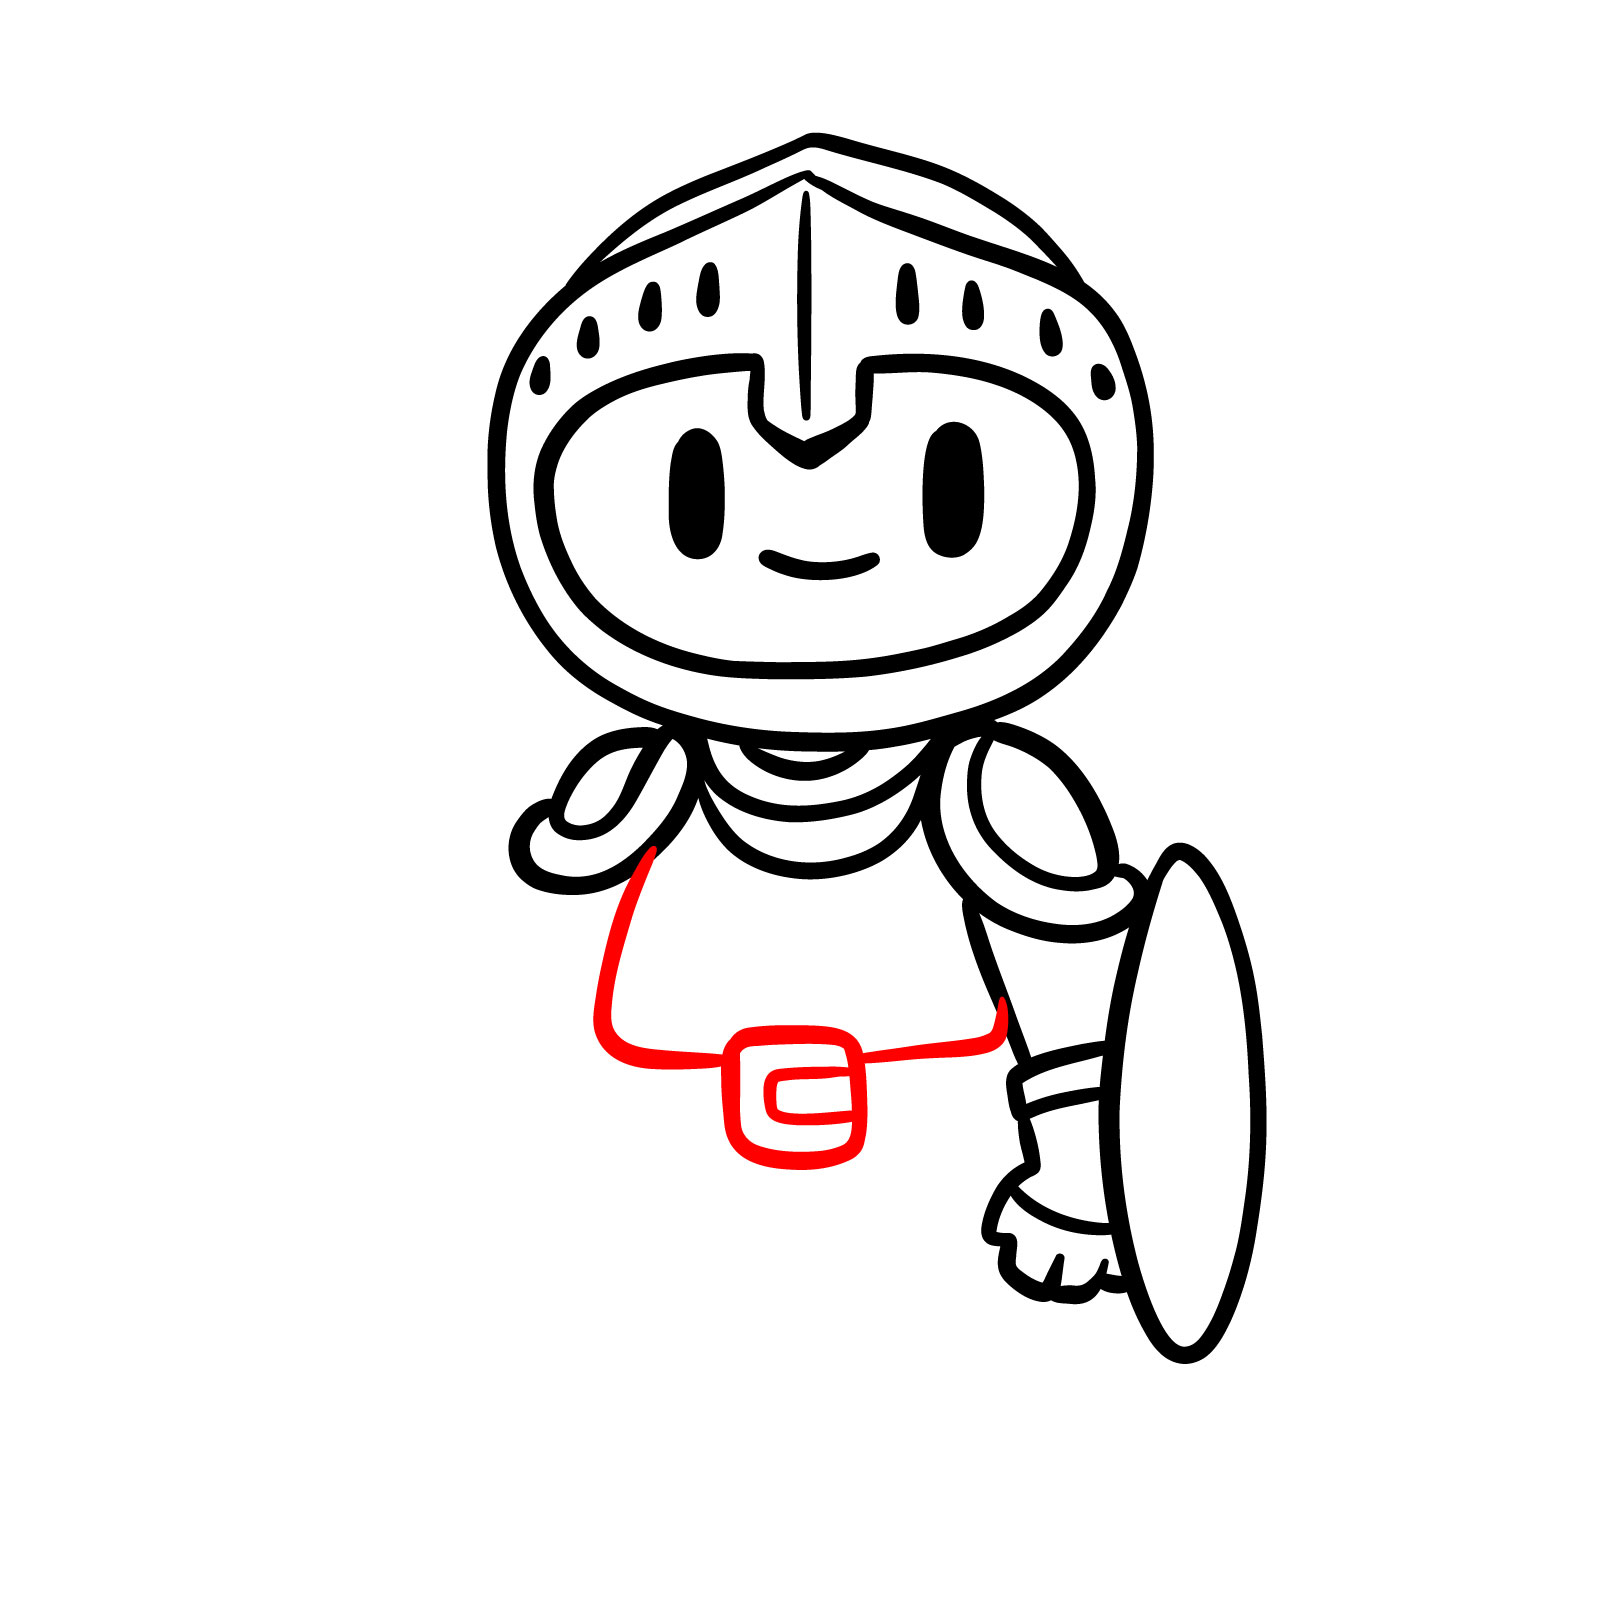 How to draw a cartoon paladin step 7: torso and belt buckle